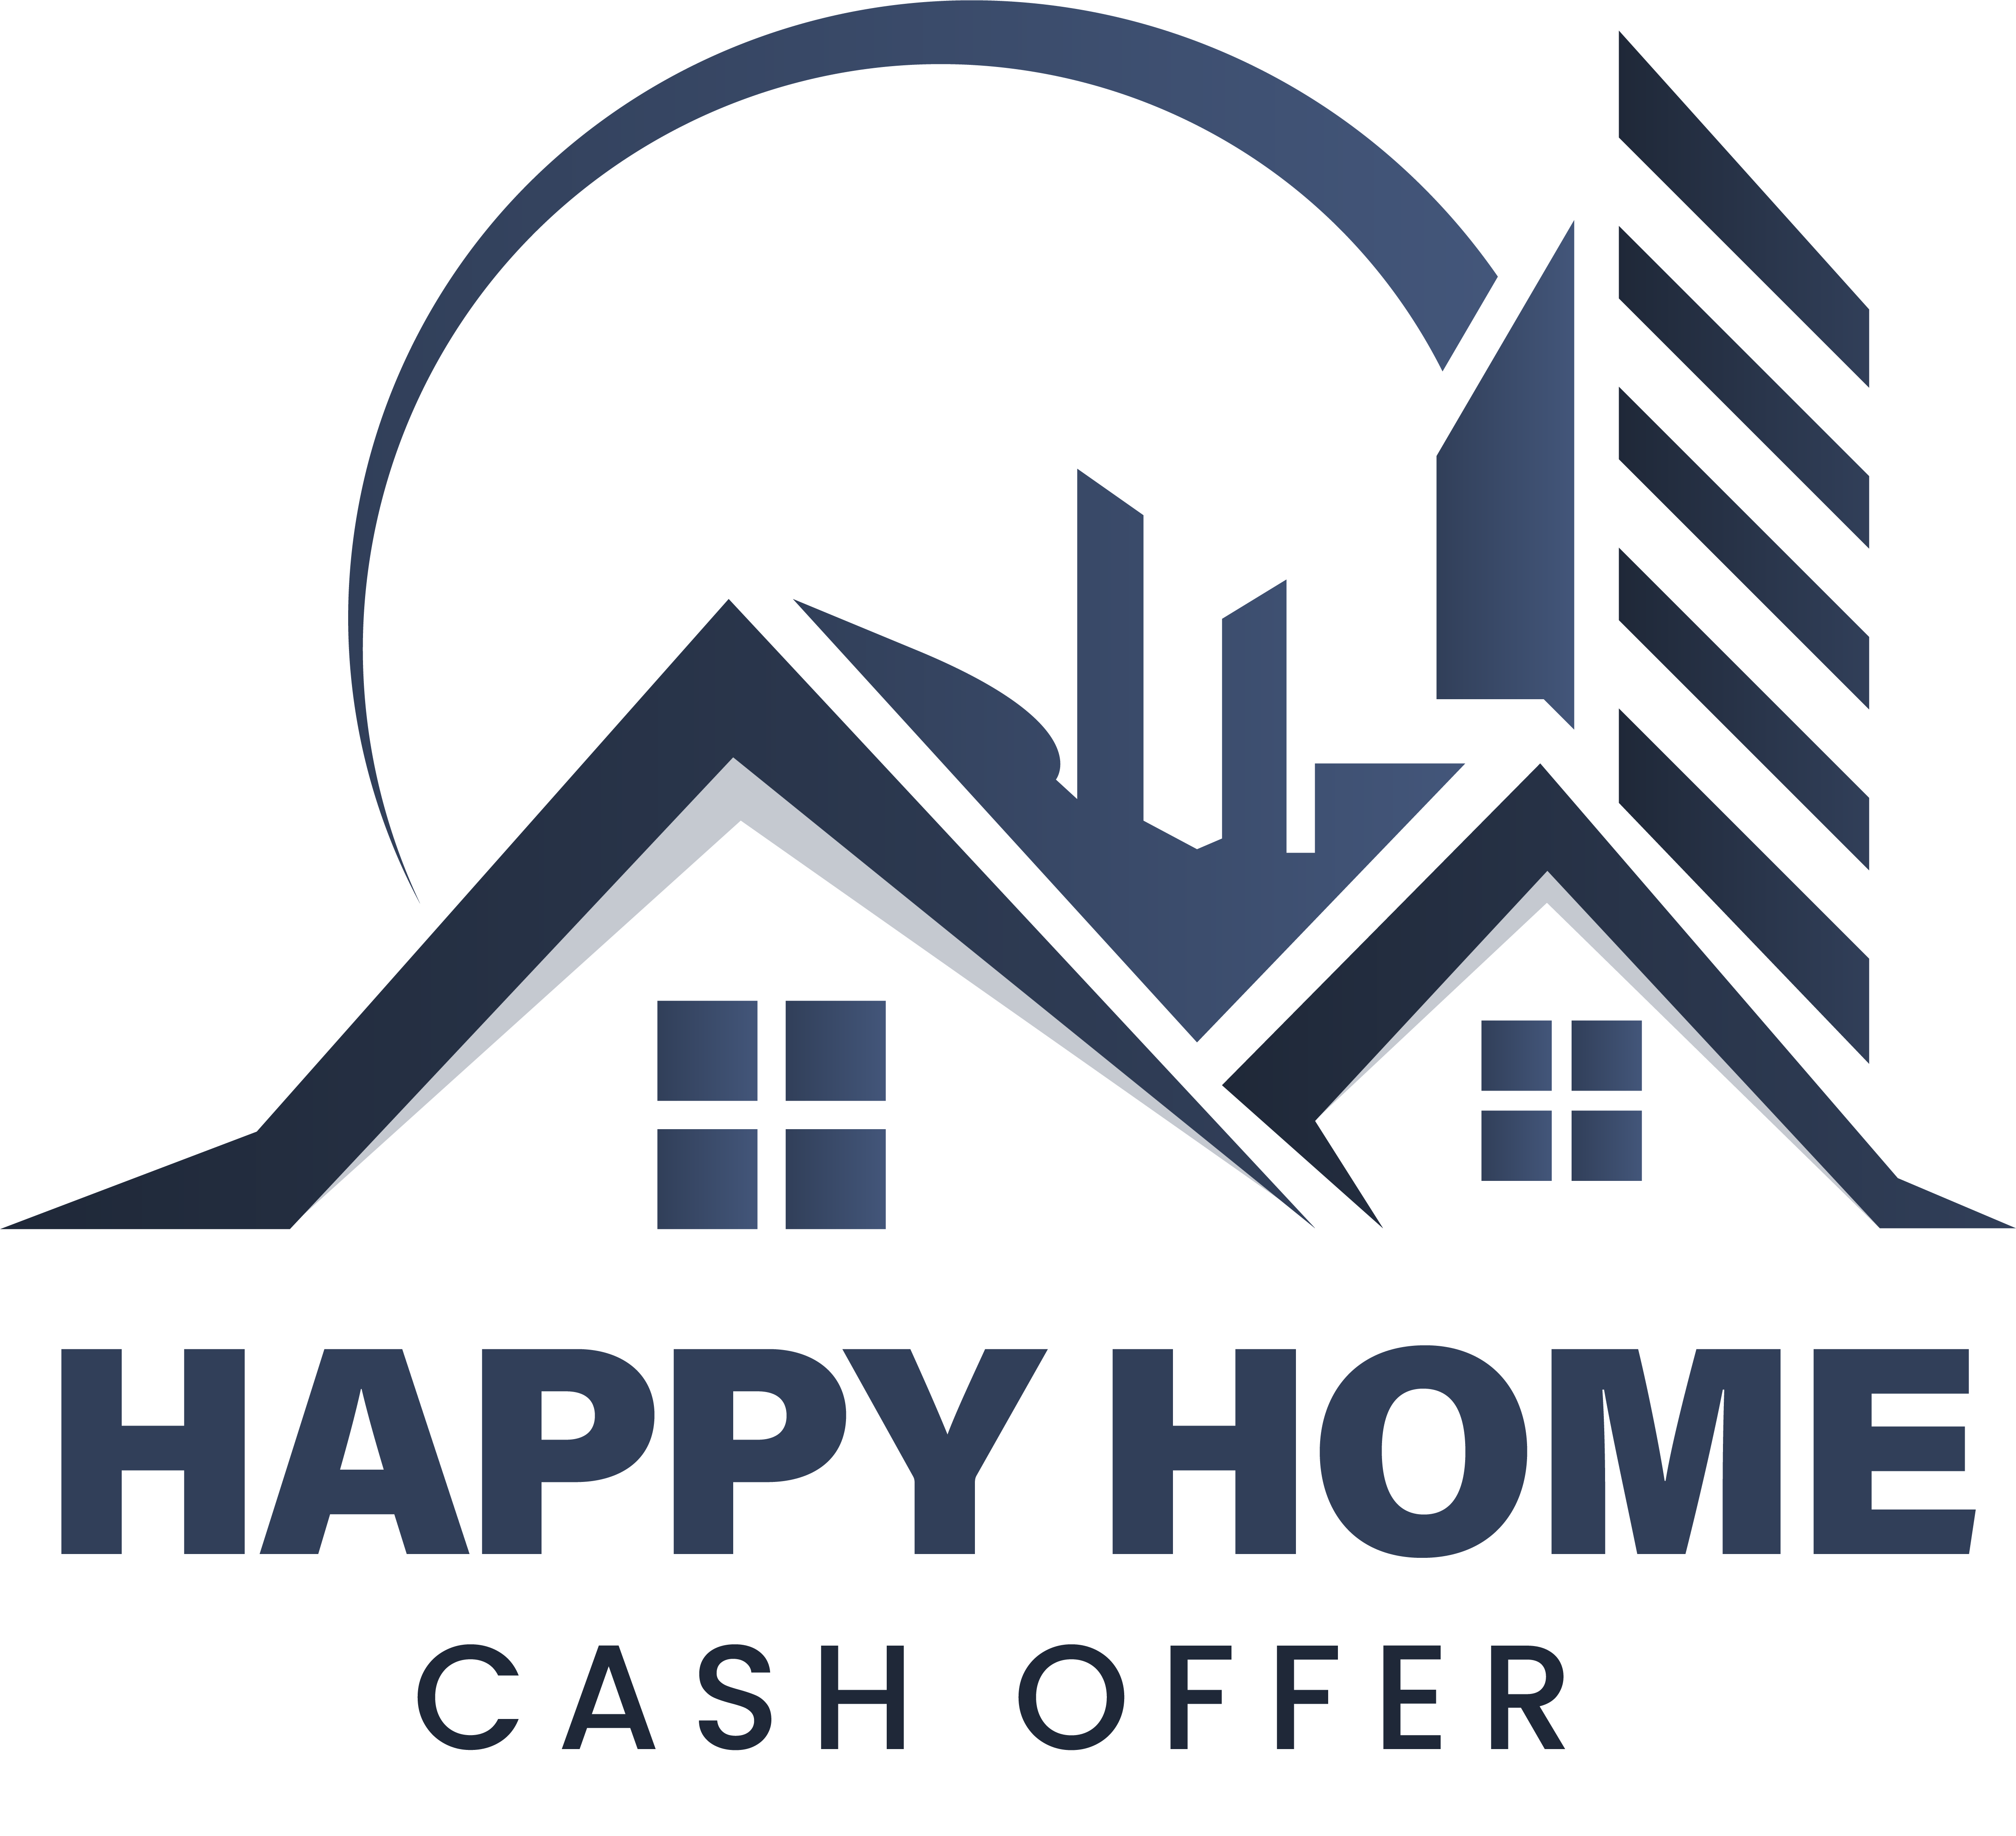 HAPPY HOME CASH OFFER